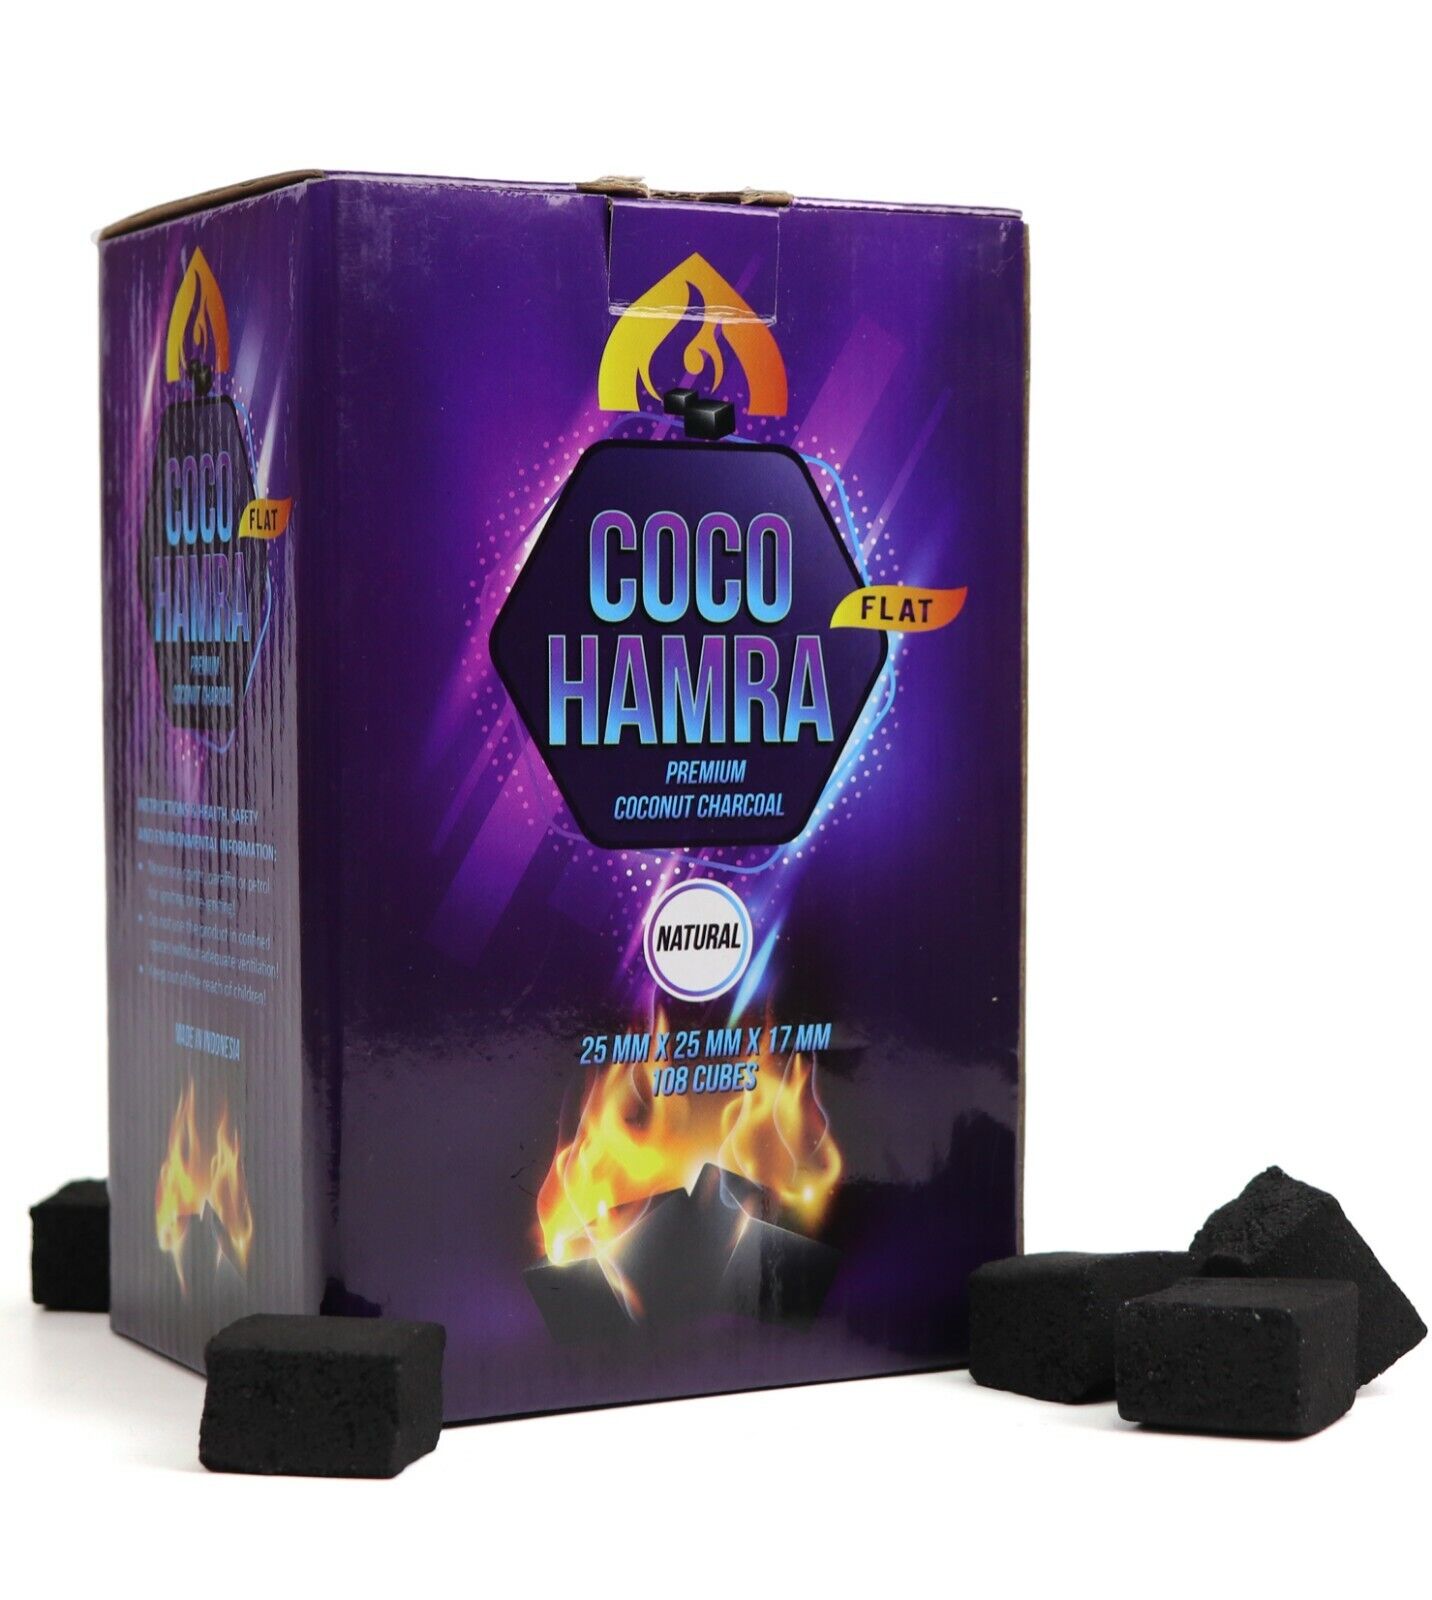 Coco Hamra Coconut Charcoal Flat Cubes 25mm  108 Count